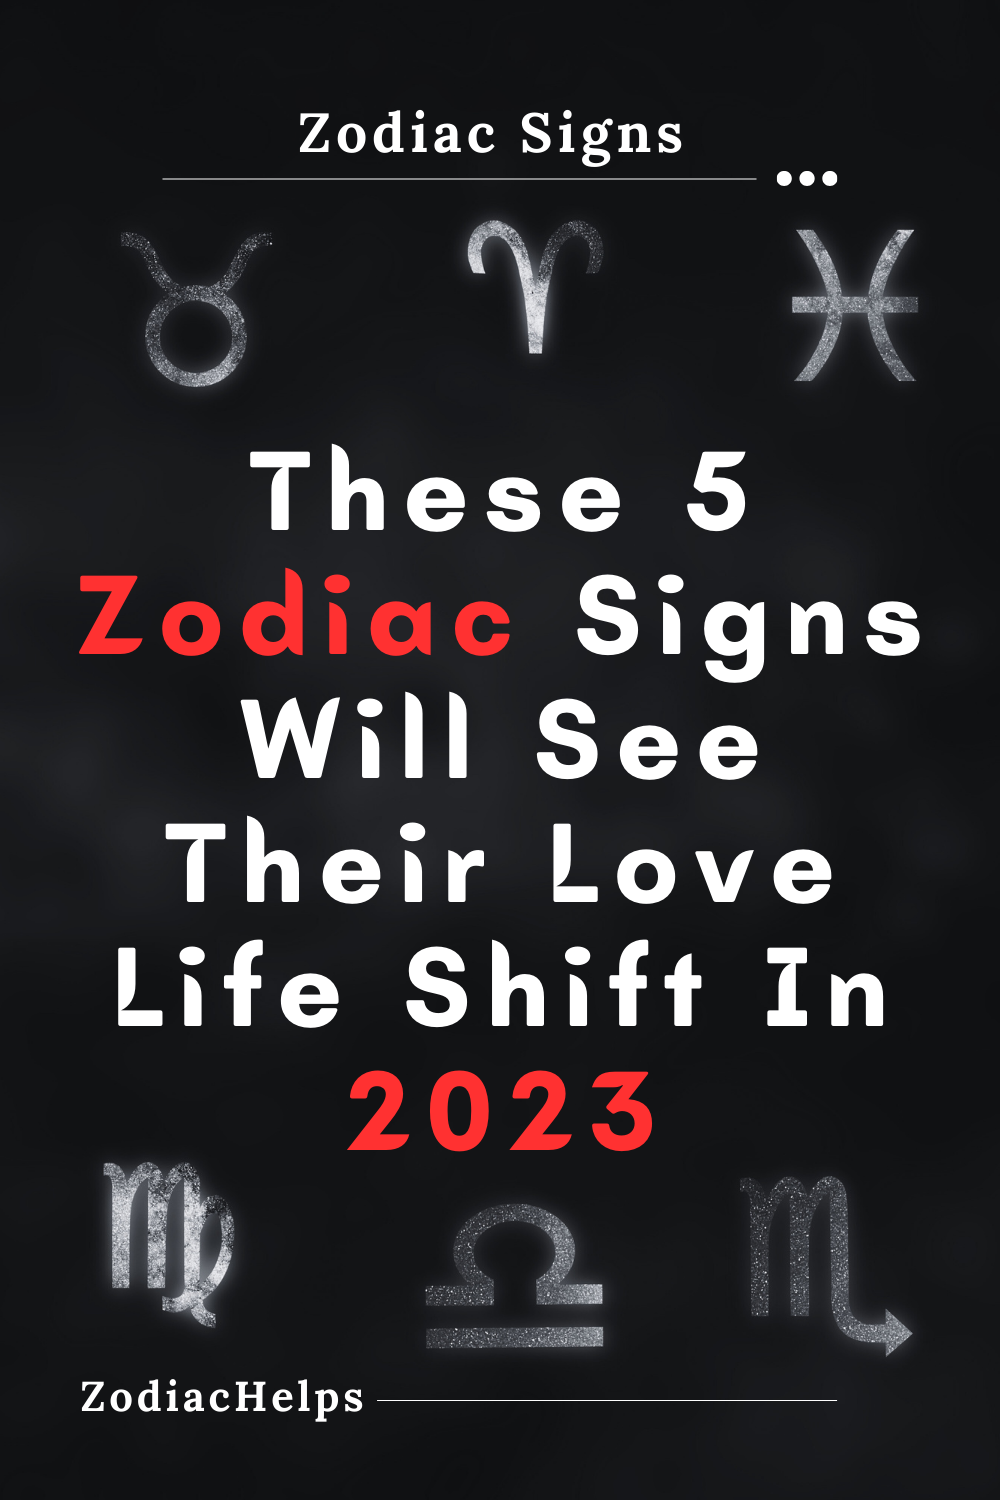 These 5 Zodiac Signs Will See Their Love Life Shift In 2023